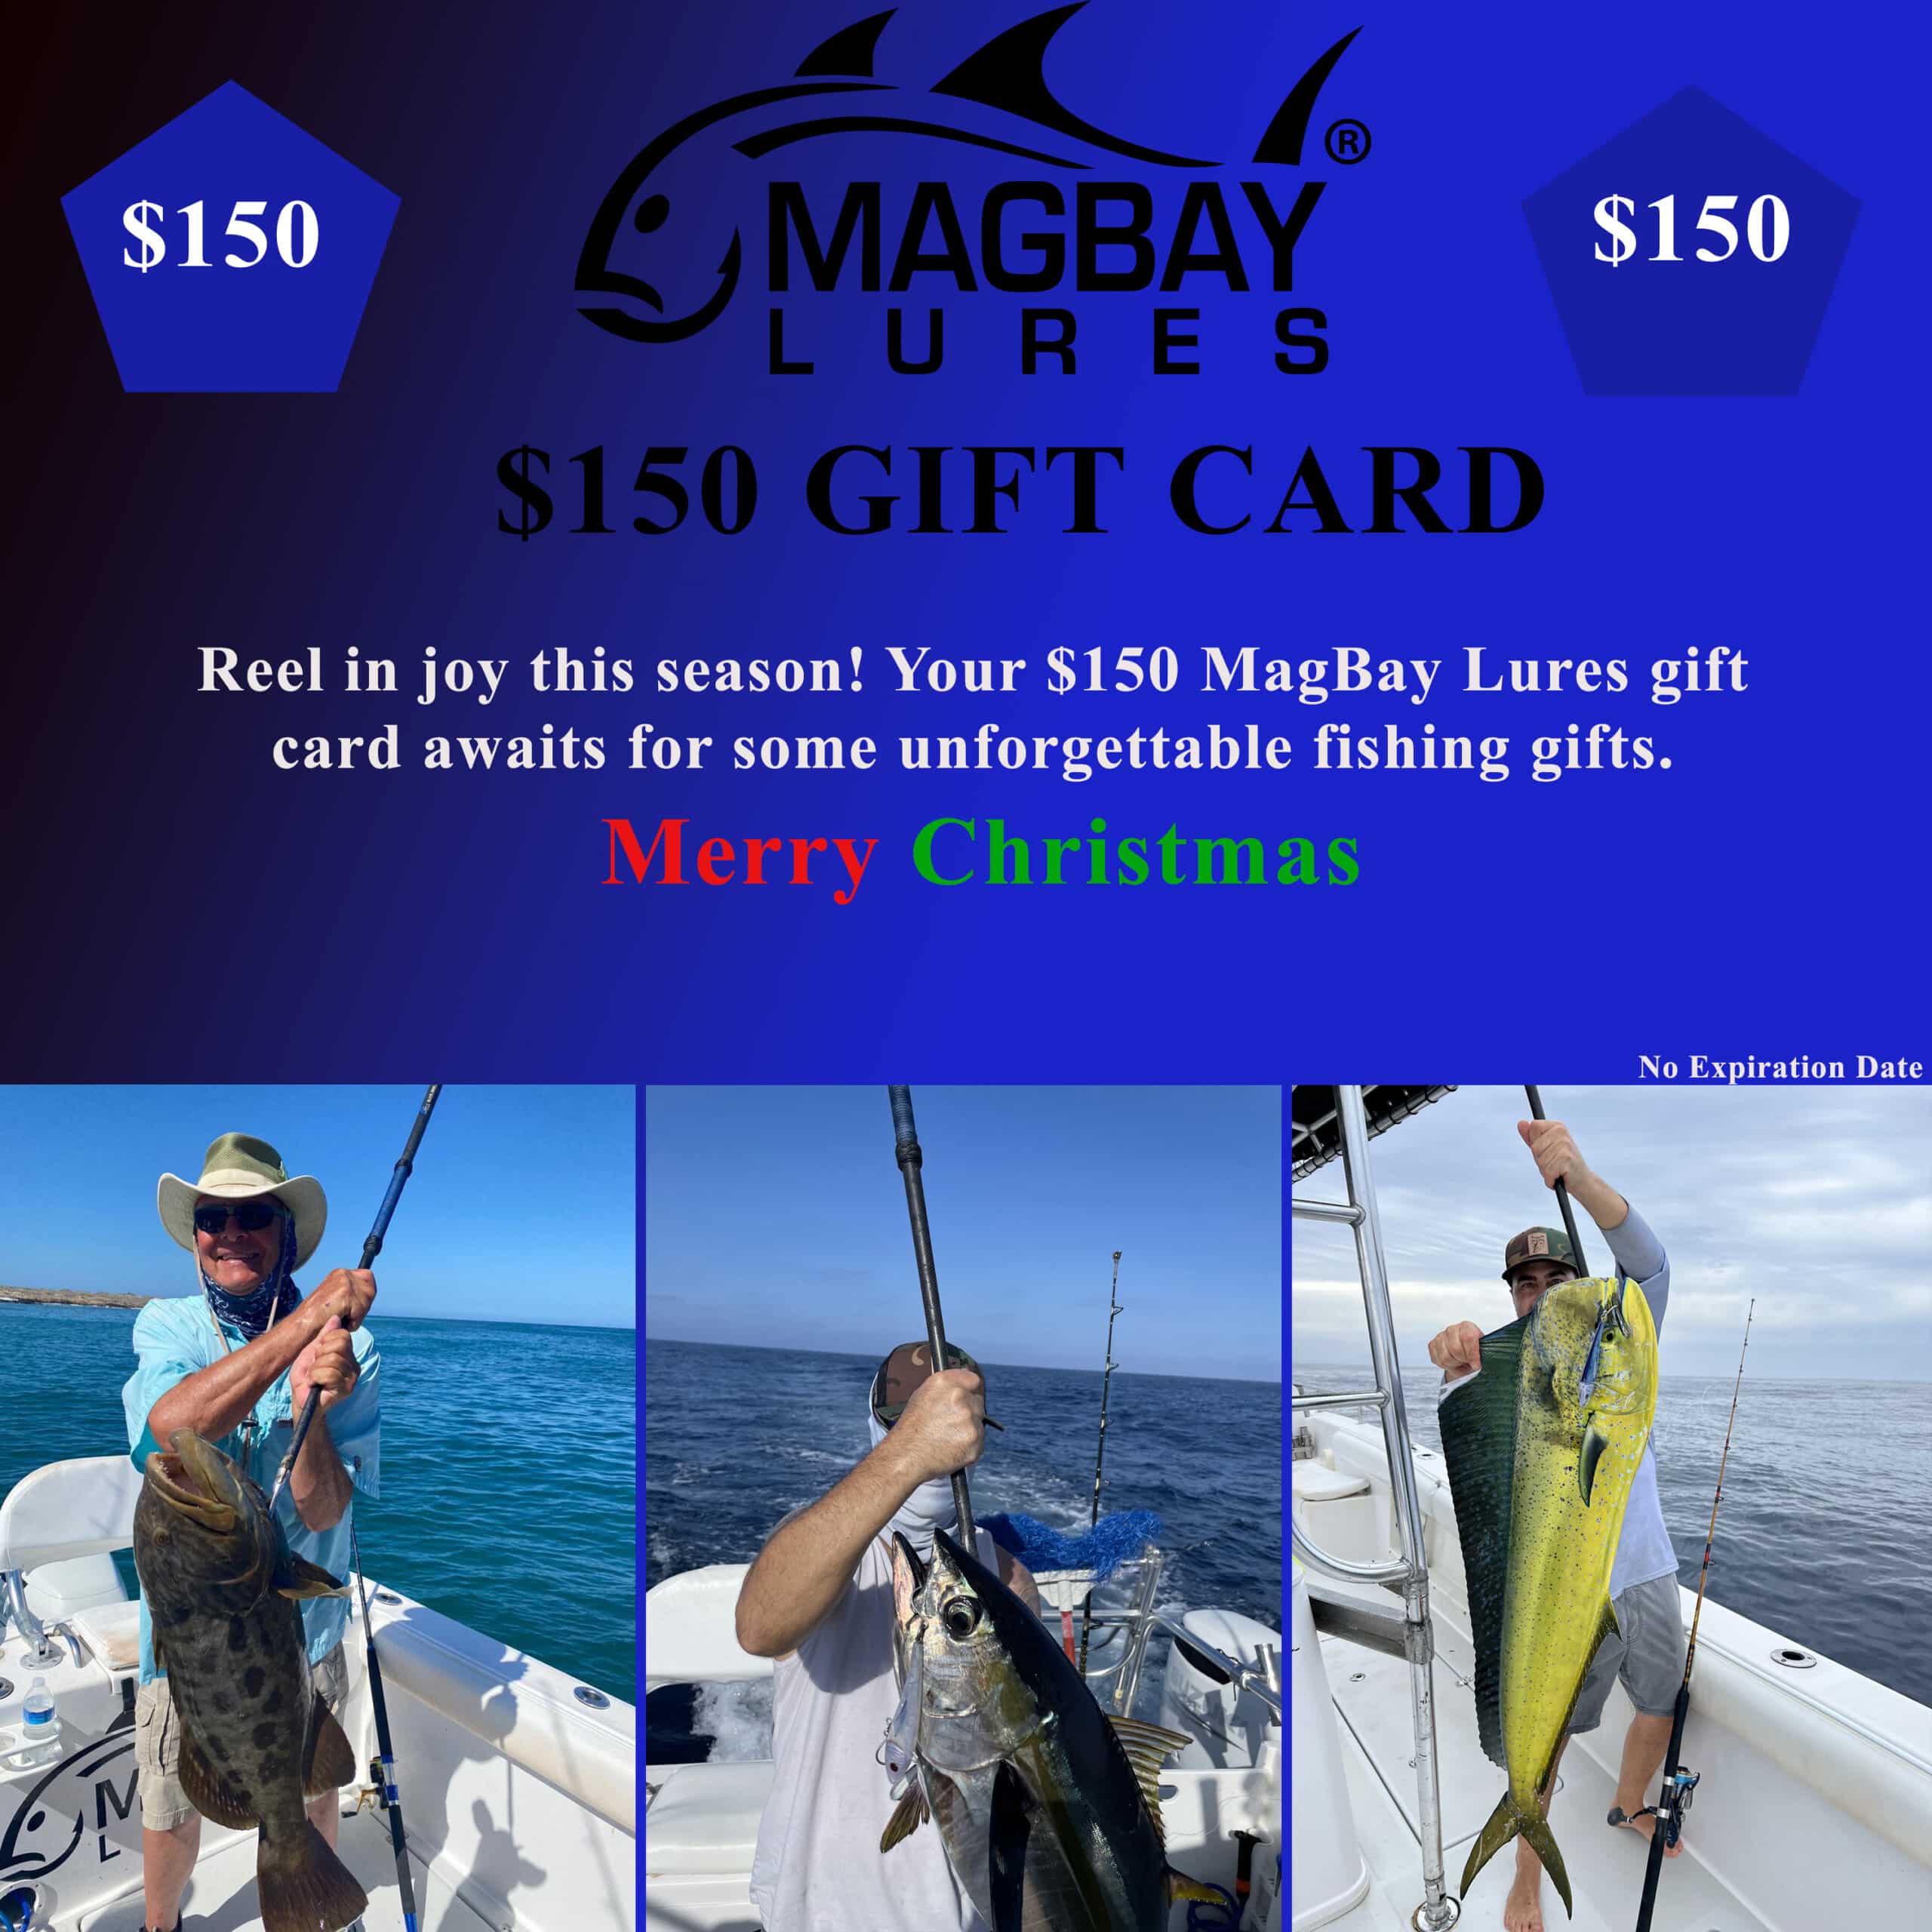 https://magbaylures.com/wp-content/uploads/2023/11/gift-card-image-web-scaled.jpg